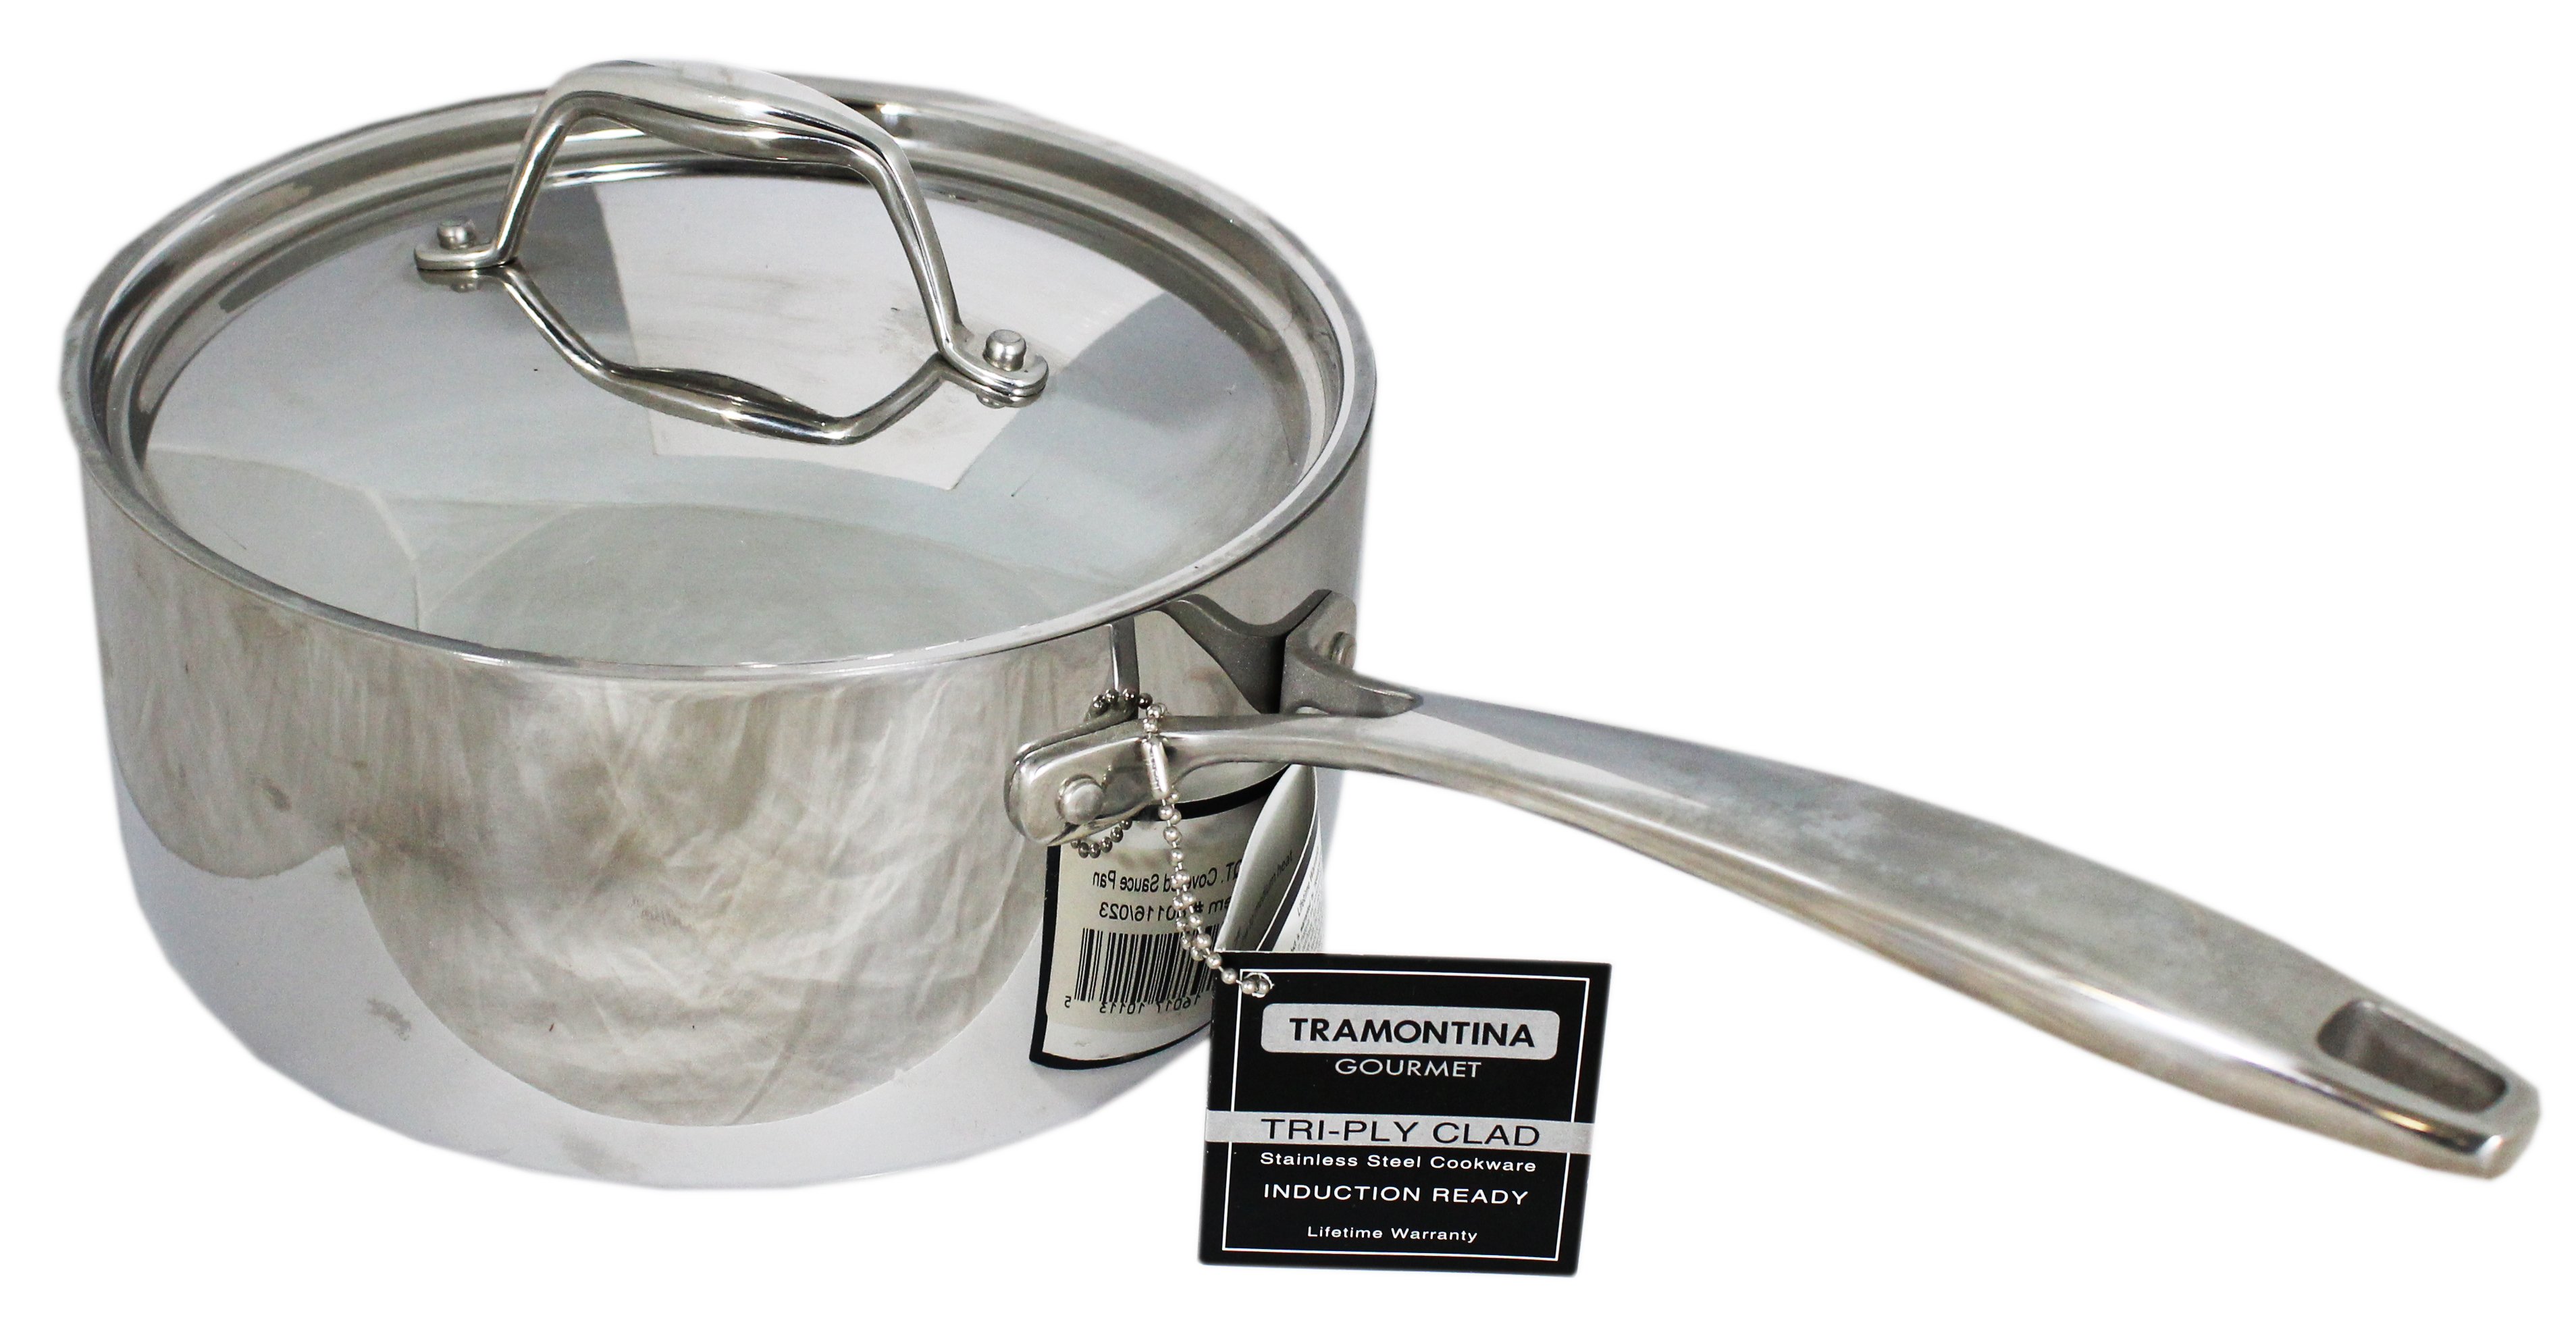 Tramontina Gourmet 2 qt Tri-Ply Clad Stainless Steel Covered Sauce Pan